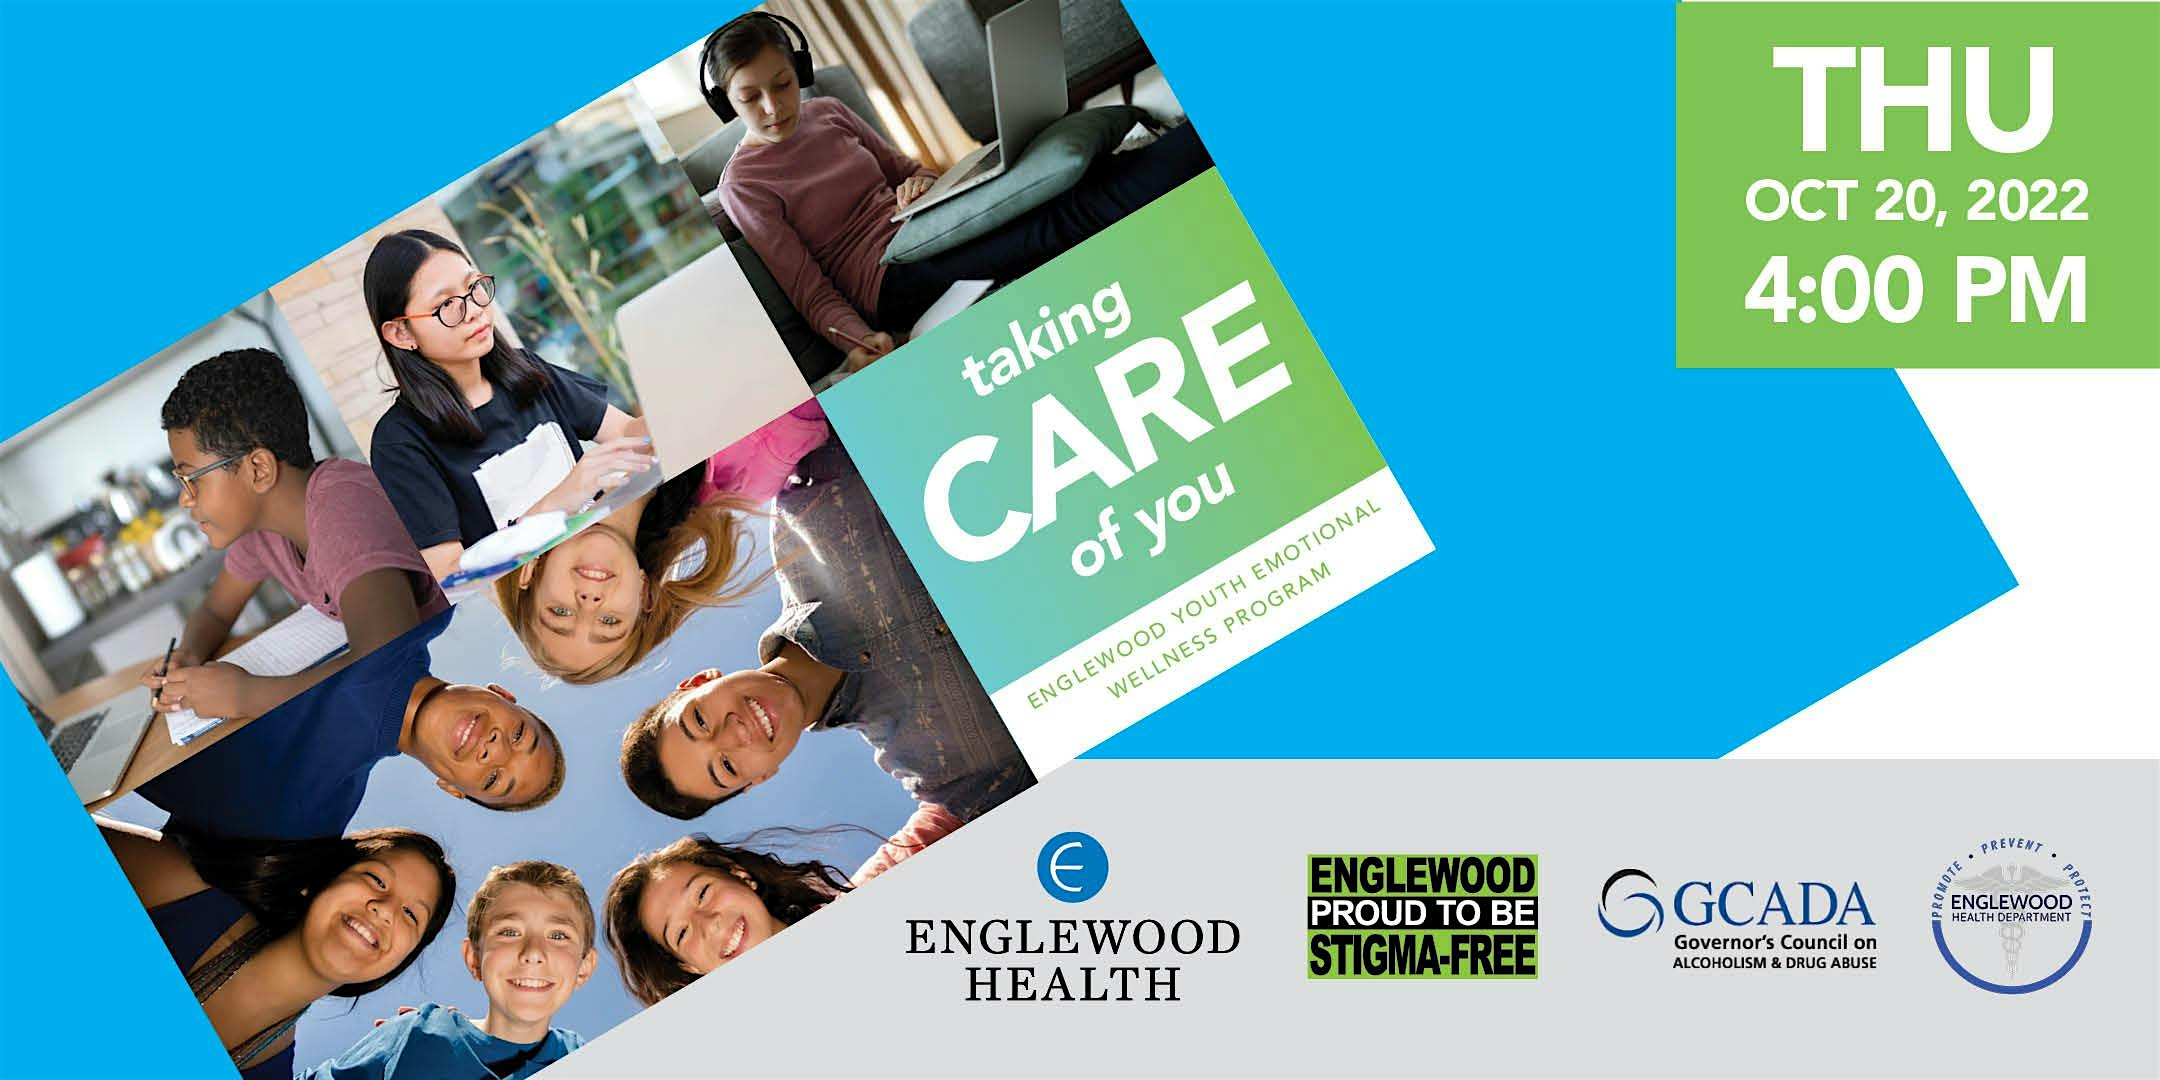 More info: Taking Care of You: Englewood Youth Emotional Wellness Program